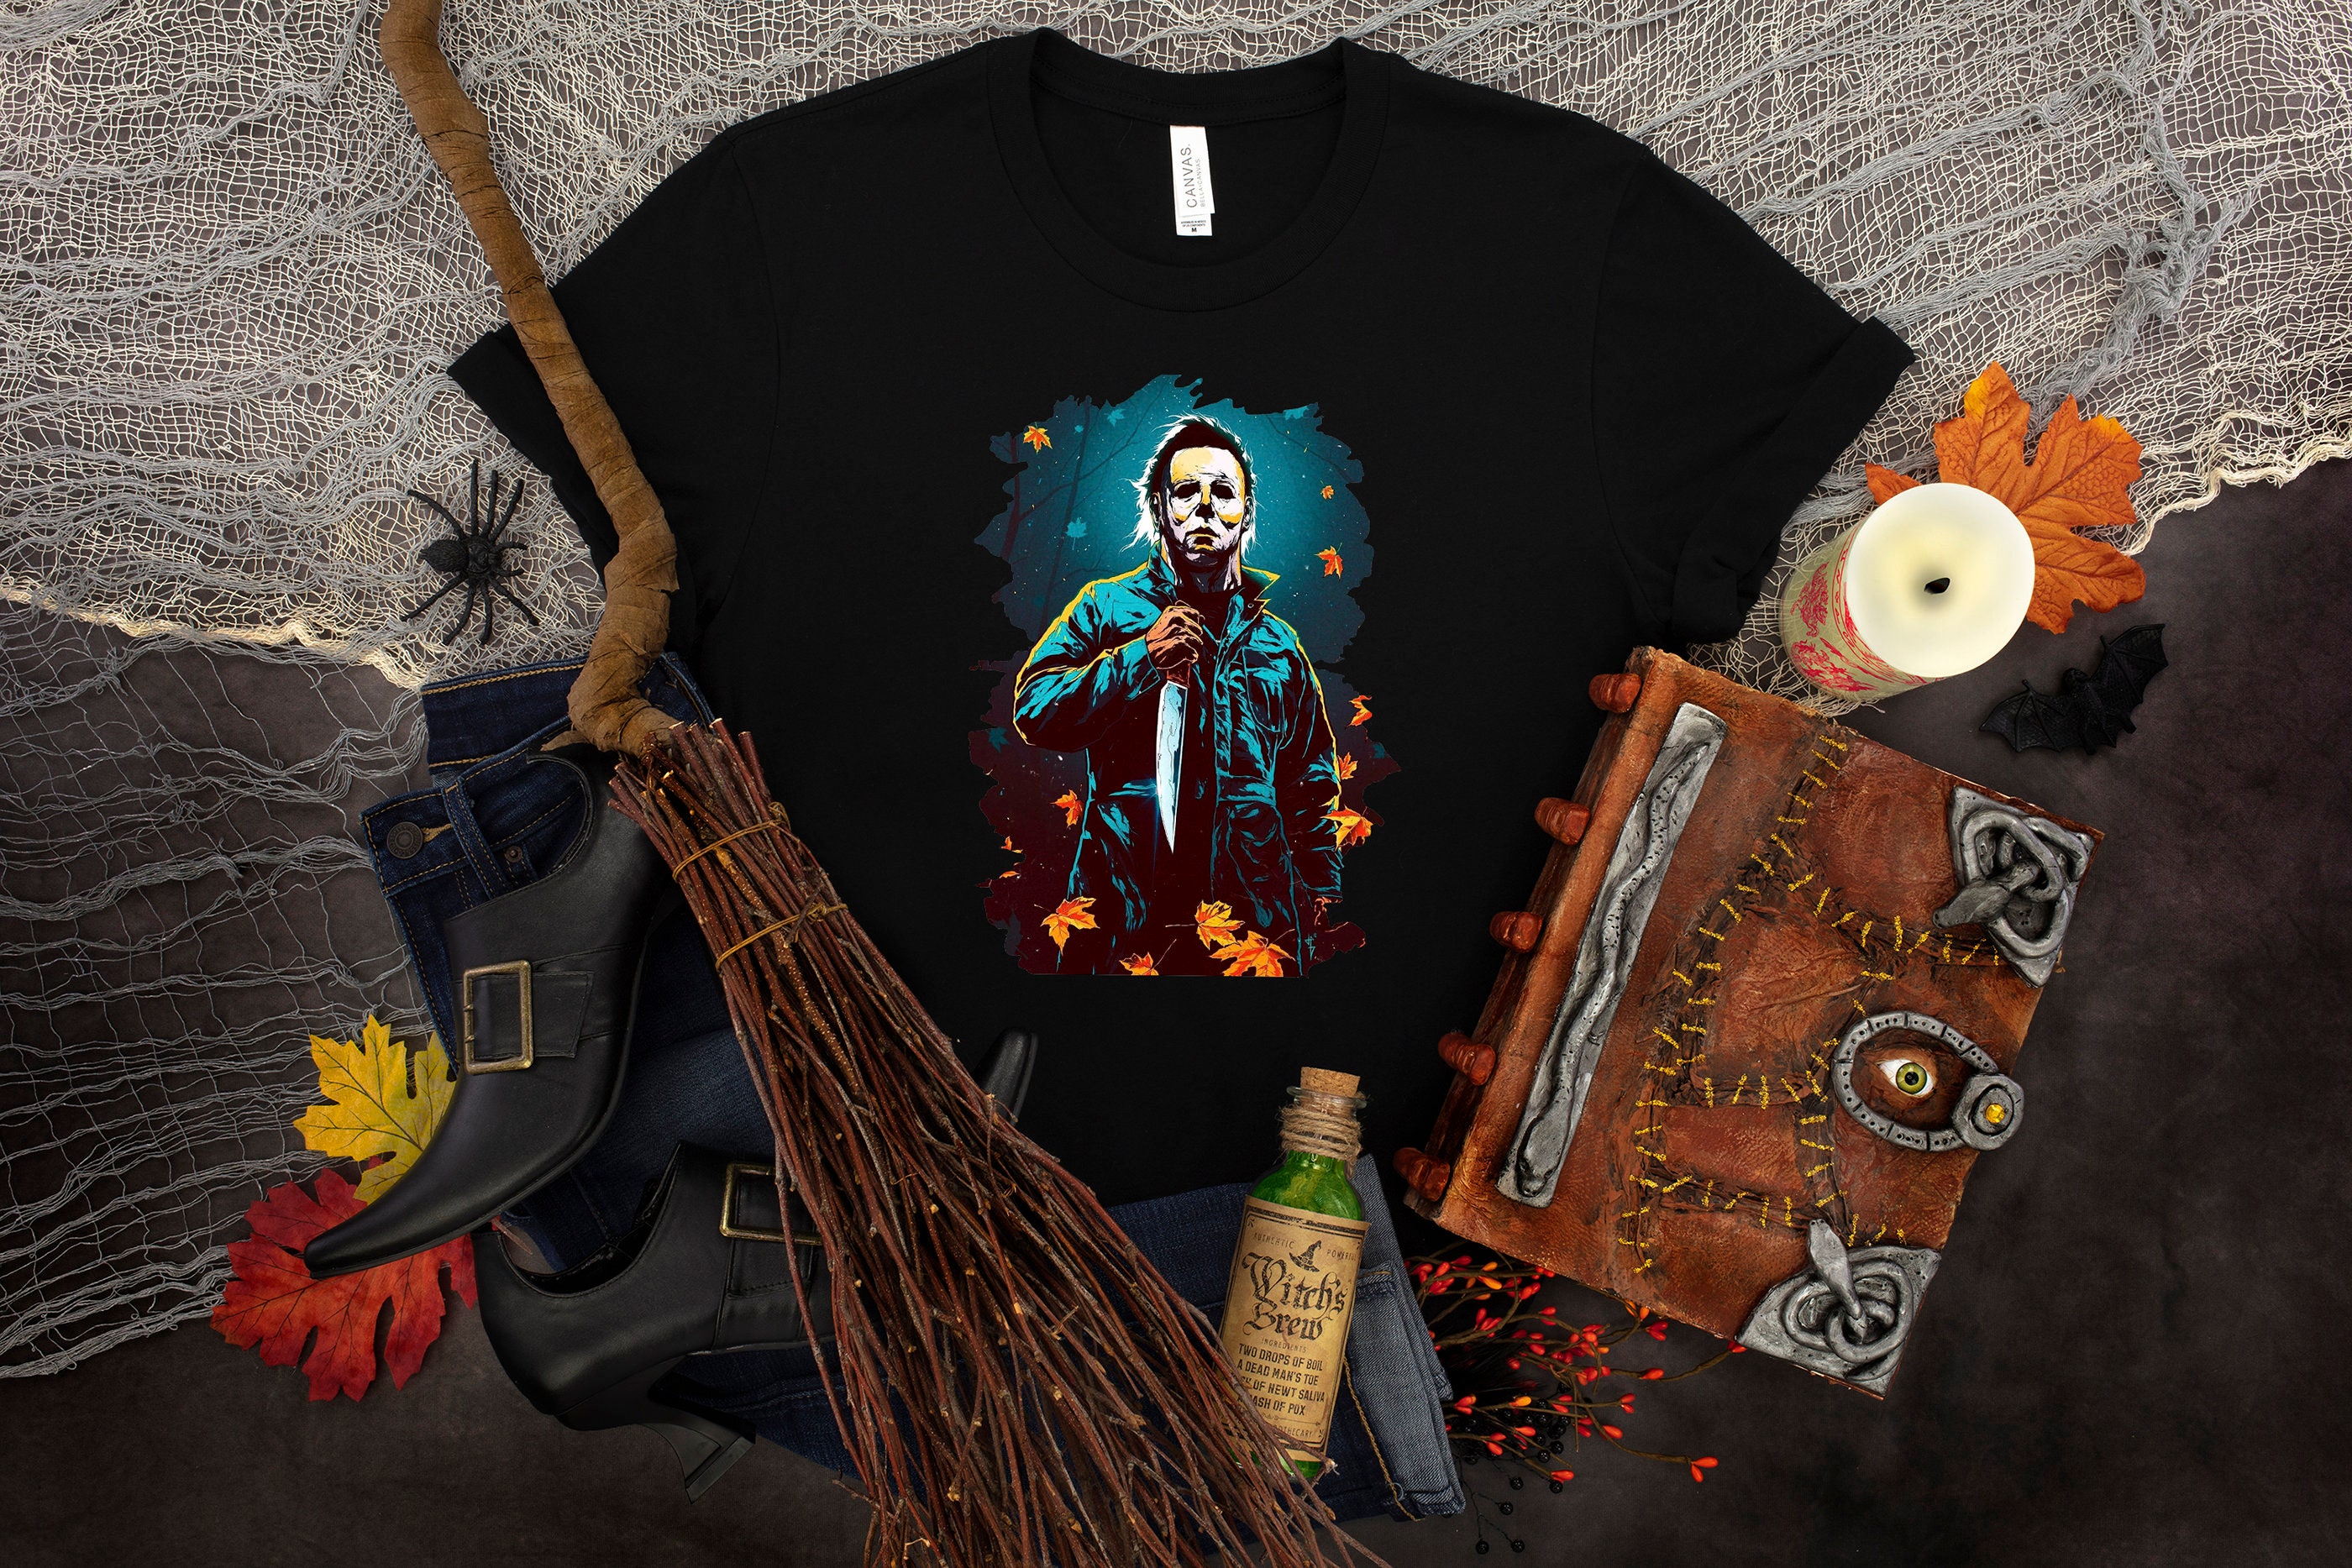 Discover Halloween Horror Movie Killers, Michael Myers Shirt, Social Distancing And Wearing A Mask In Public Since 1978 Shirt Gift for Fans Horrors